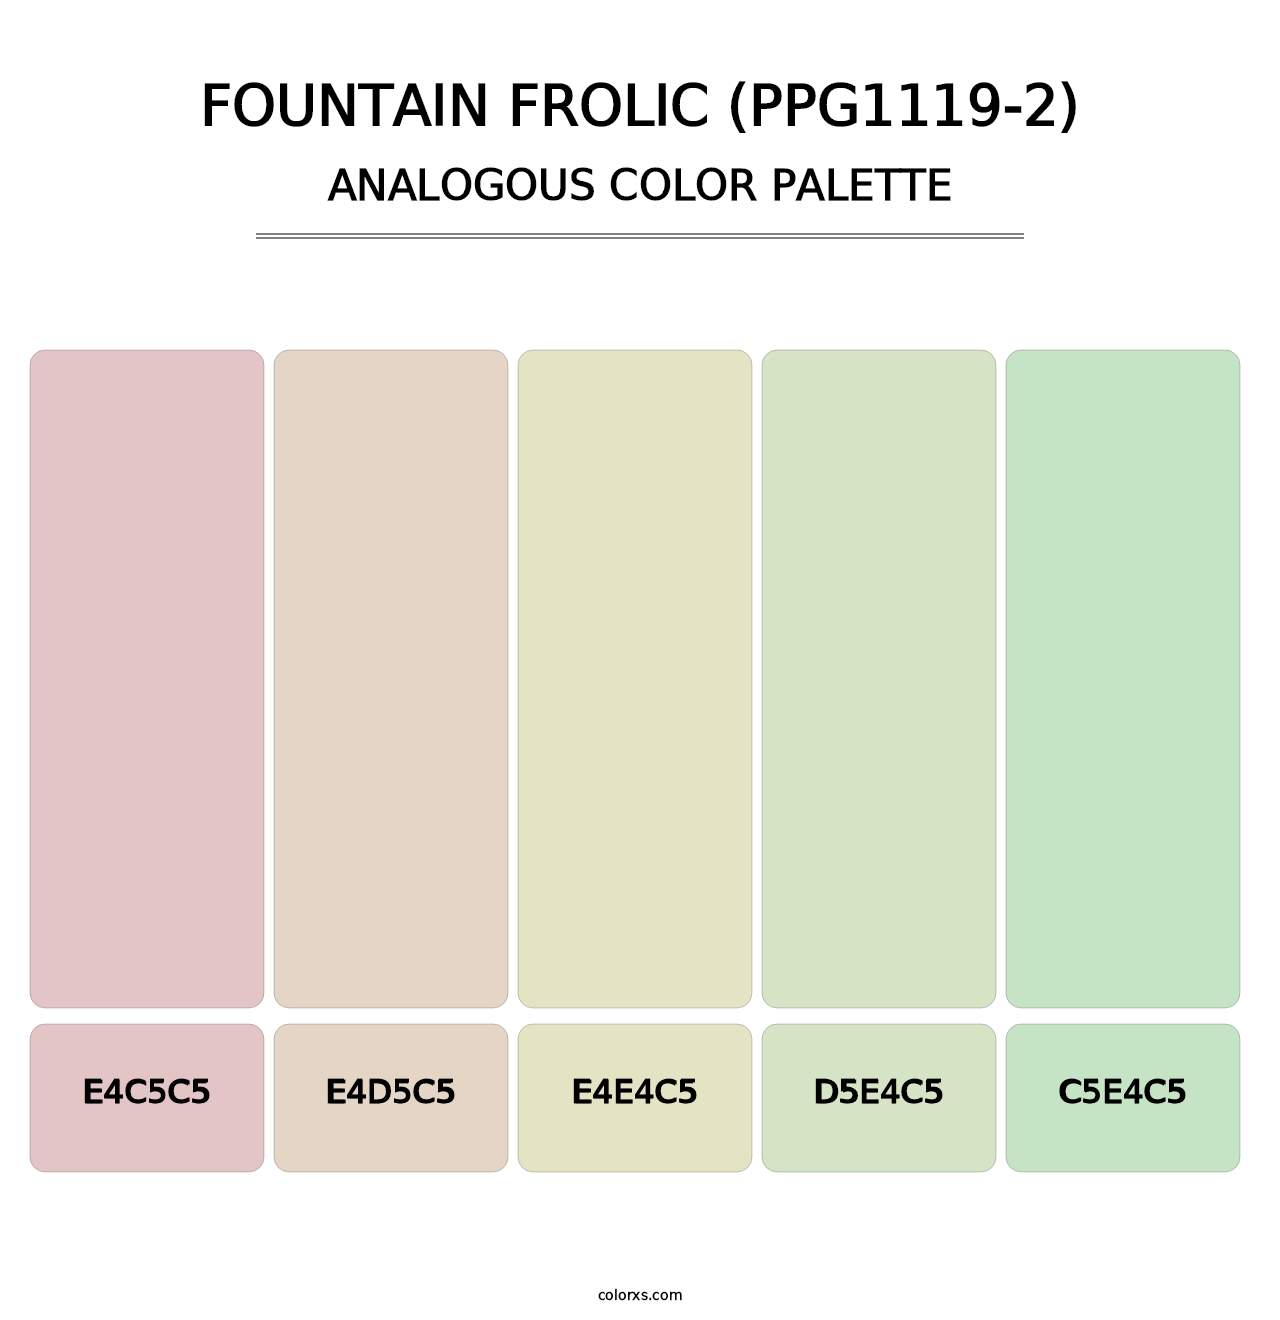 Fountain Frolic (PPG1119-2) - Analogous Color Palette